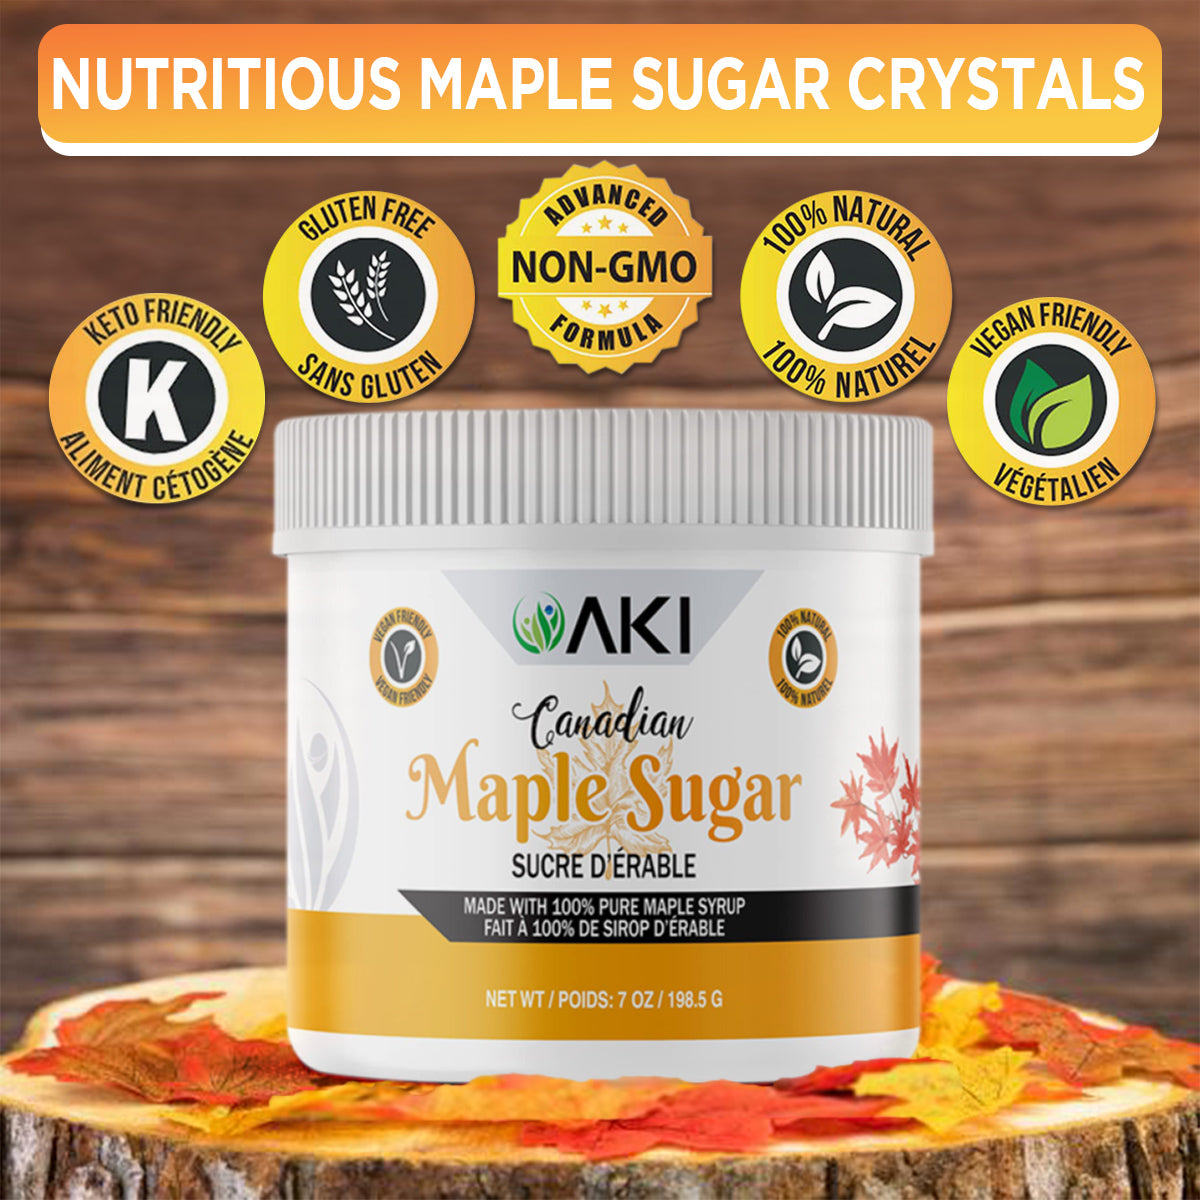 Canadian Natural Maple Sugar Granulated (7 Oz/ 198.5 g) NEW RELEASE